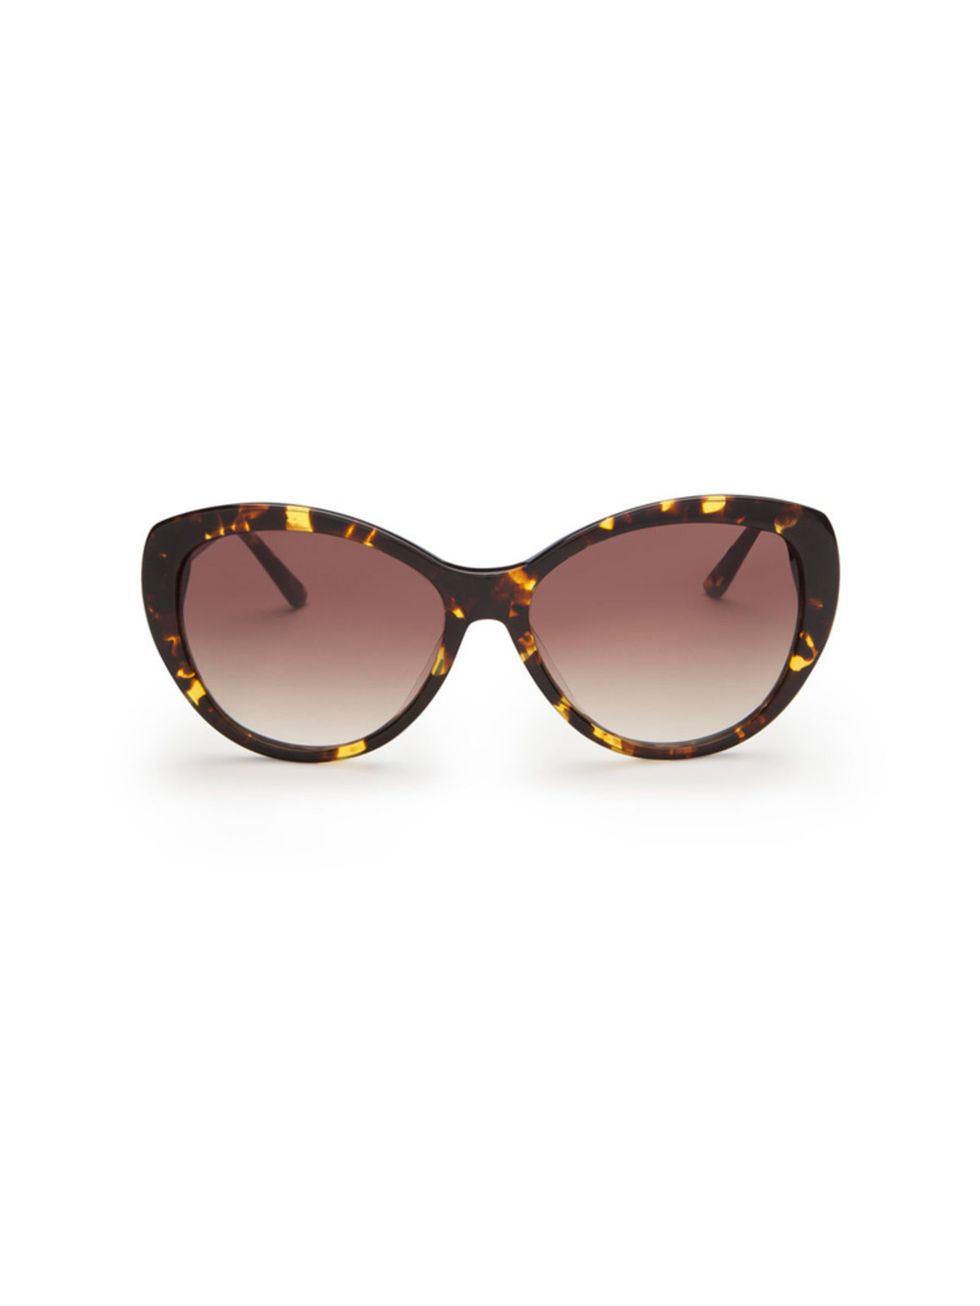 <p><a href="http://www.whistles.com/women/accessories/sunglasses/olivia-oversized-tort-catseye.html?dwvar_olivia-oversized-tort-catseye_color=Tortoise%20Shell#start=1" target="_blank">Whistles sunglasses</a>, £65</p>